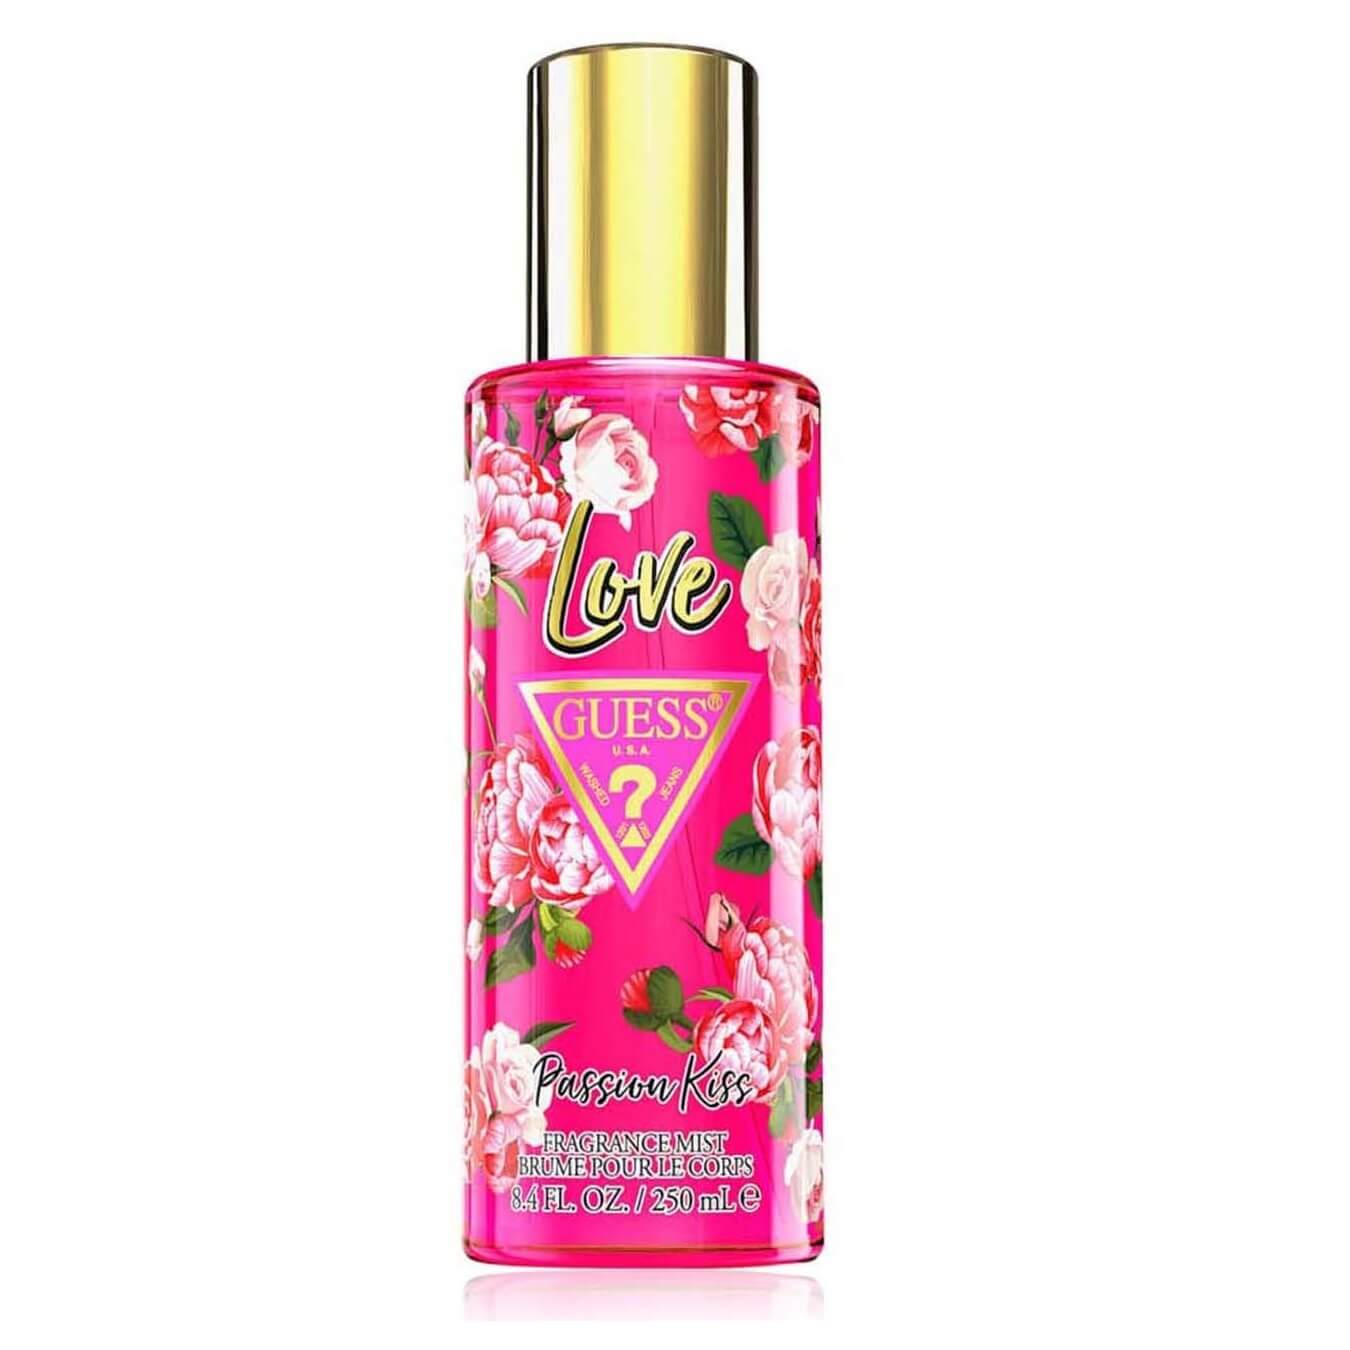 guess love passion kiss body mist